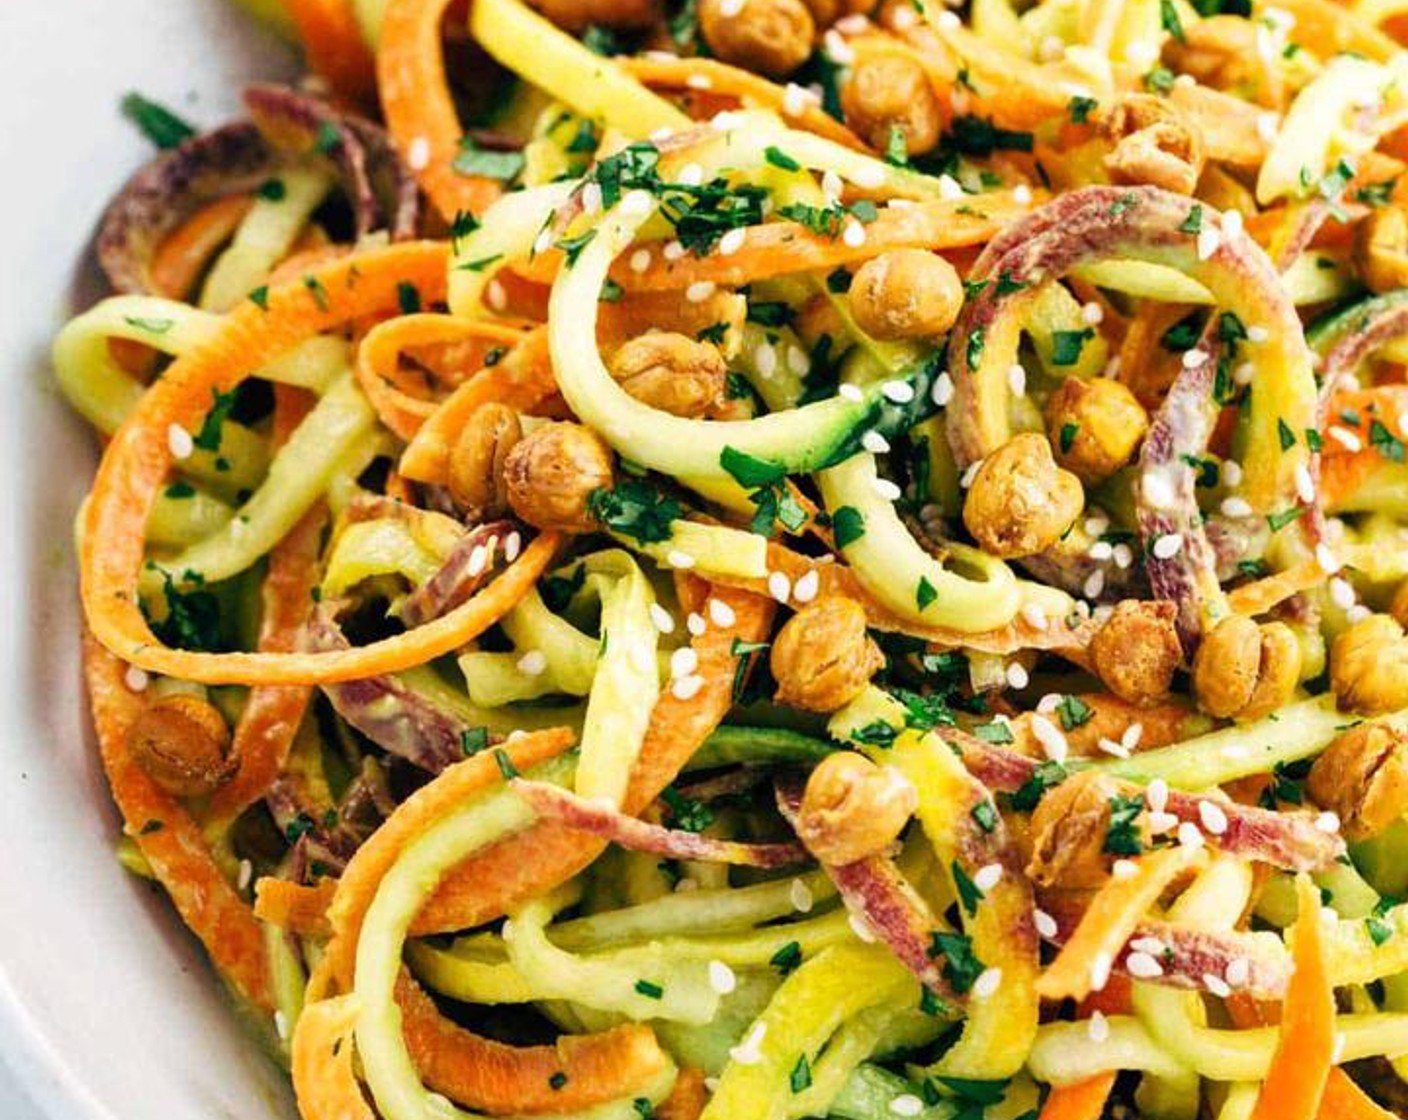 Spiralized Vegetable Salad with Roasted Chickpeas